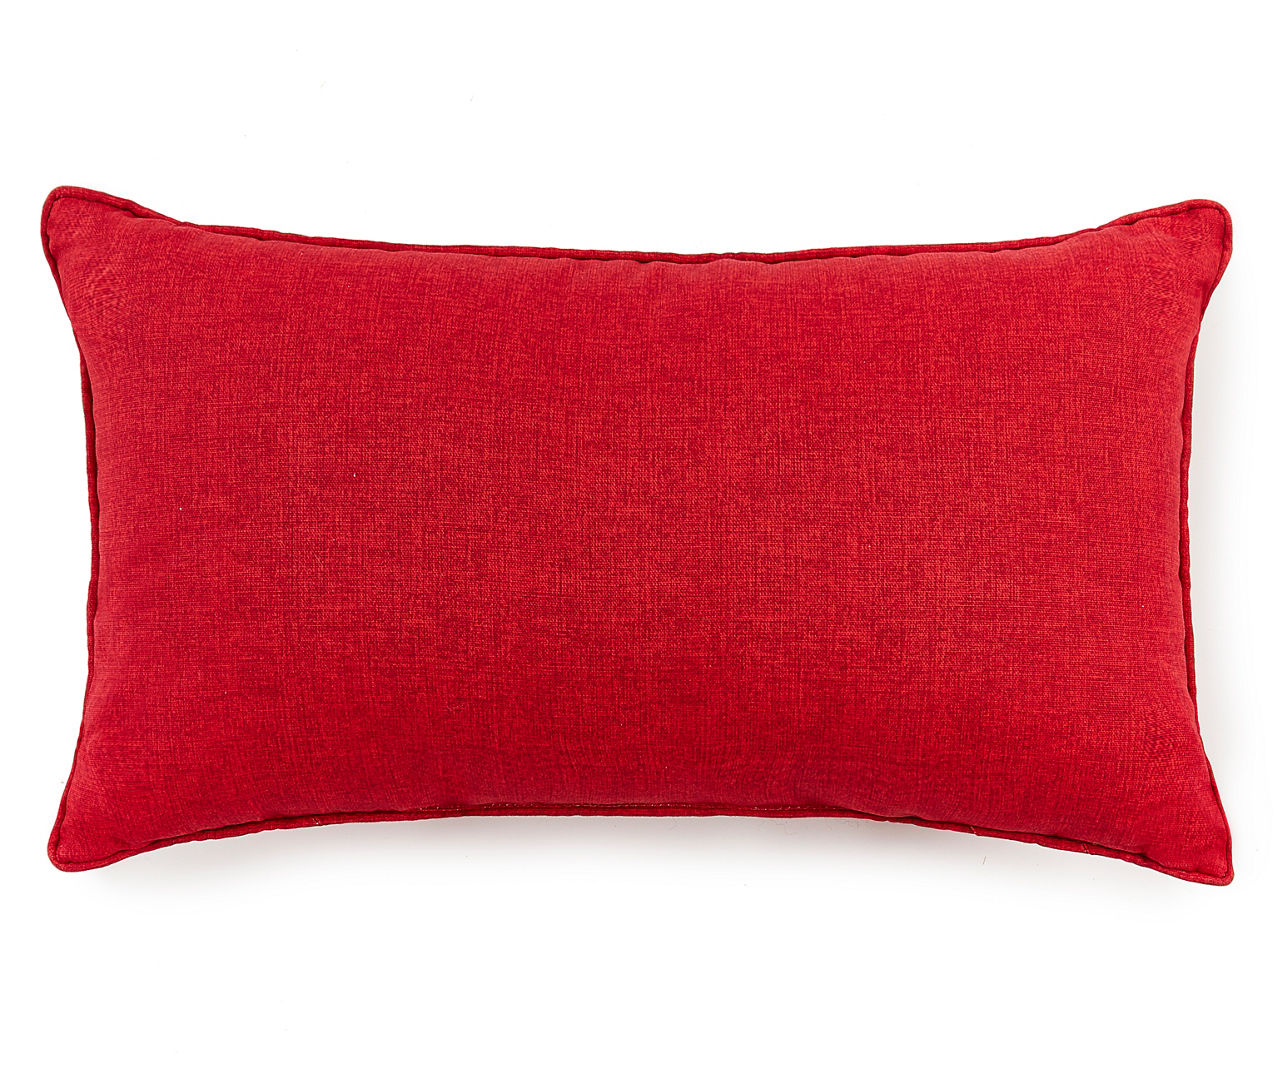 Reversible Red Throw Pillow 18×18 Inches / 45x45cm